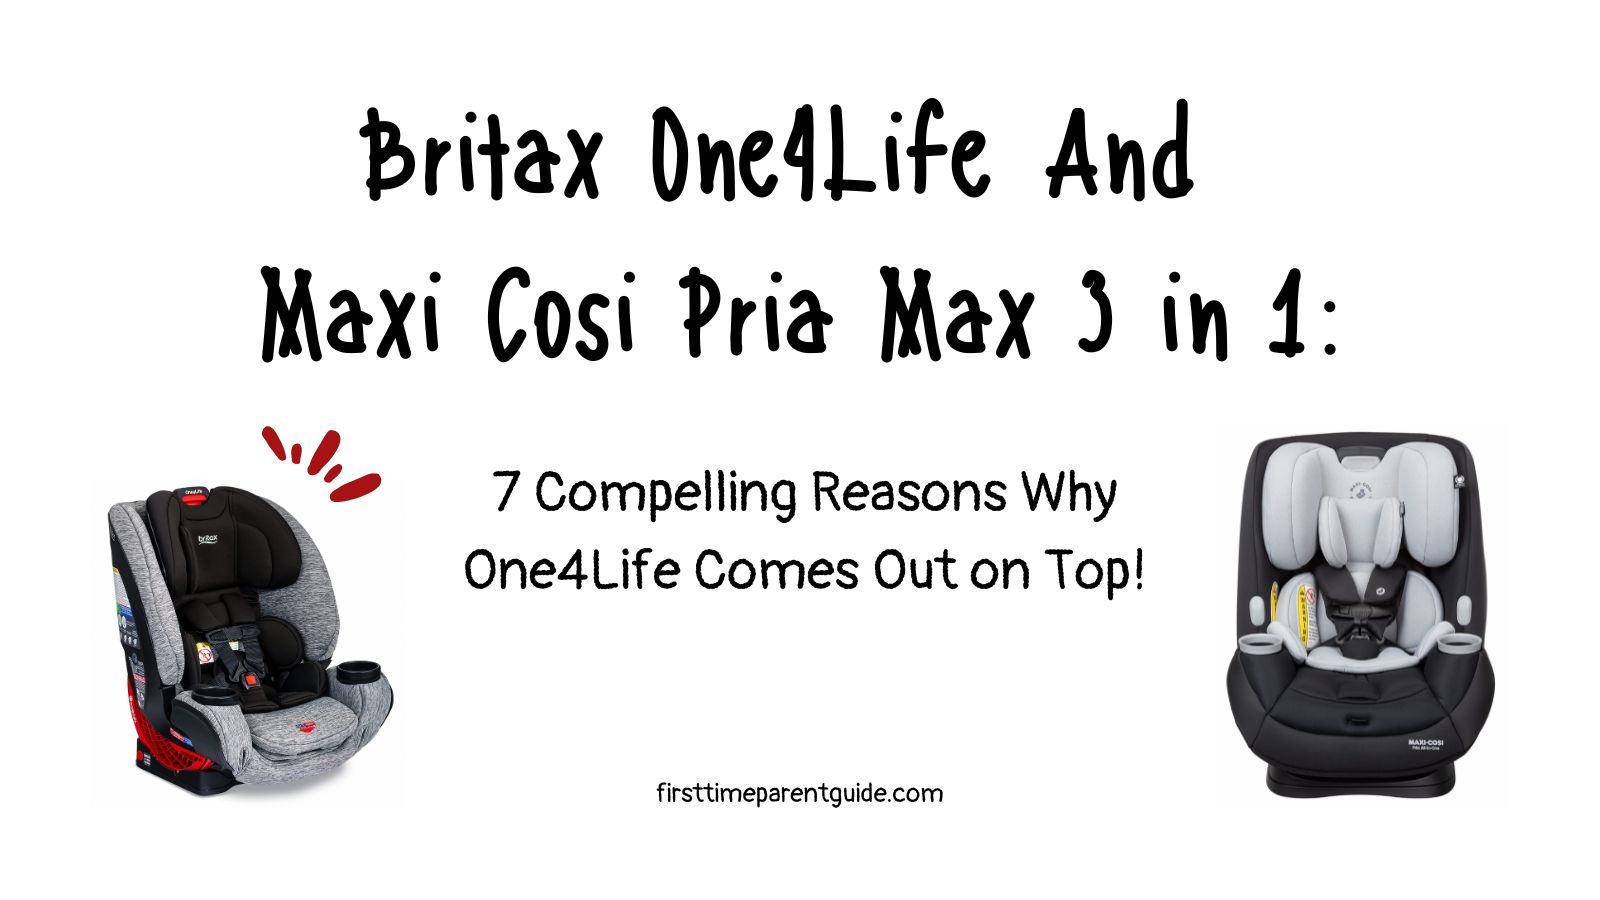 Britax One4Life And